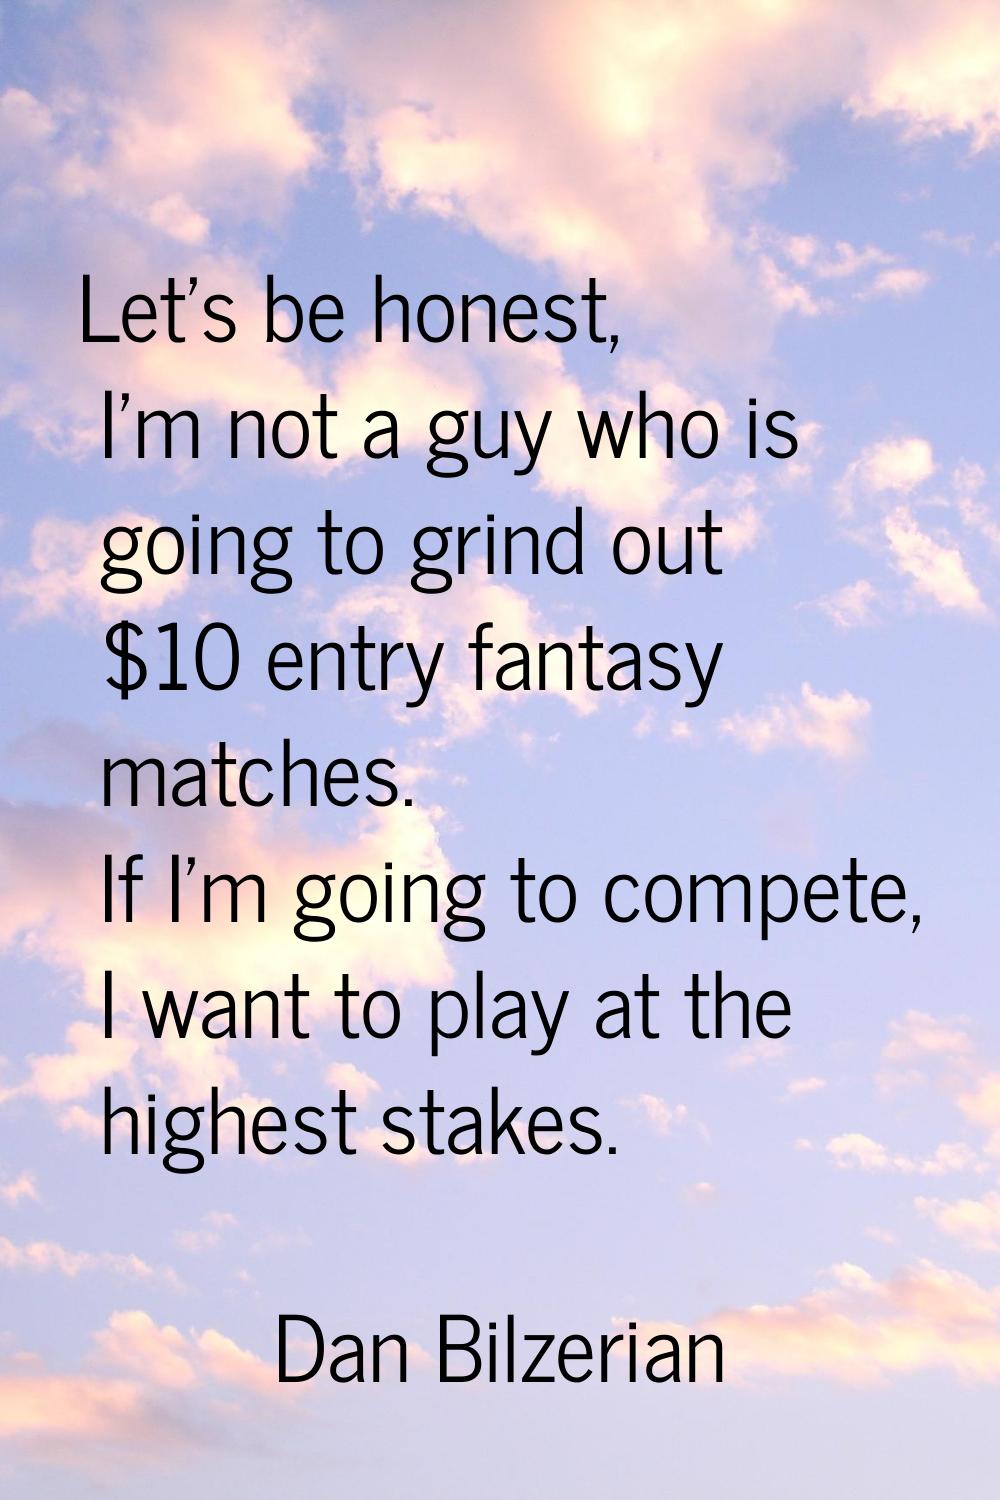 Let's be honest, I'm not a guy who is going to grind out $10 entry fantasy matches. If I'm going to